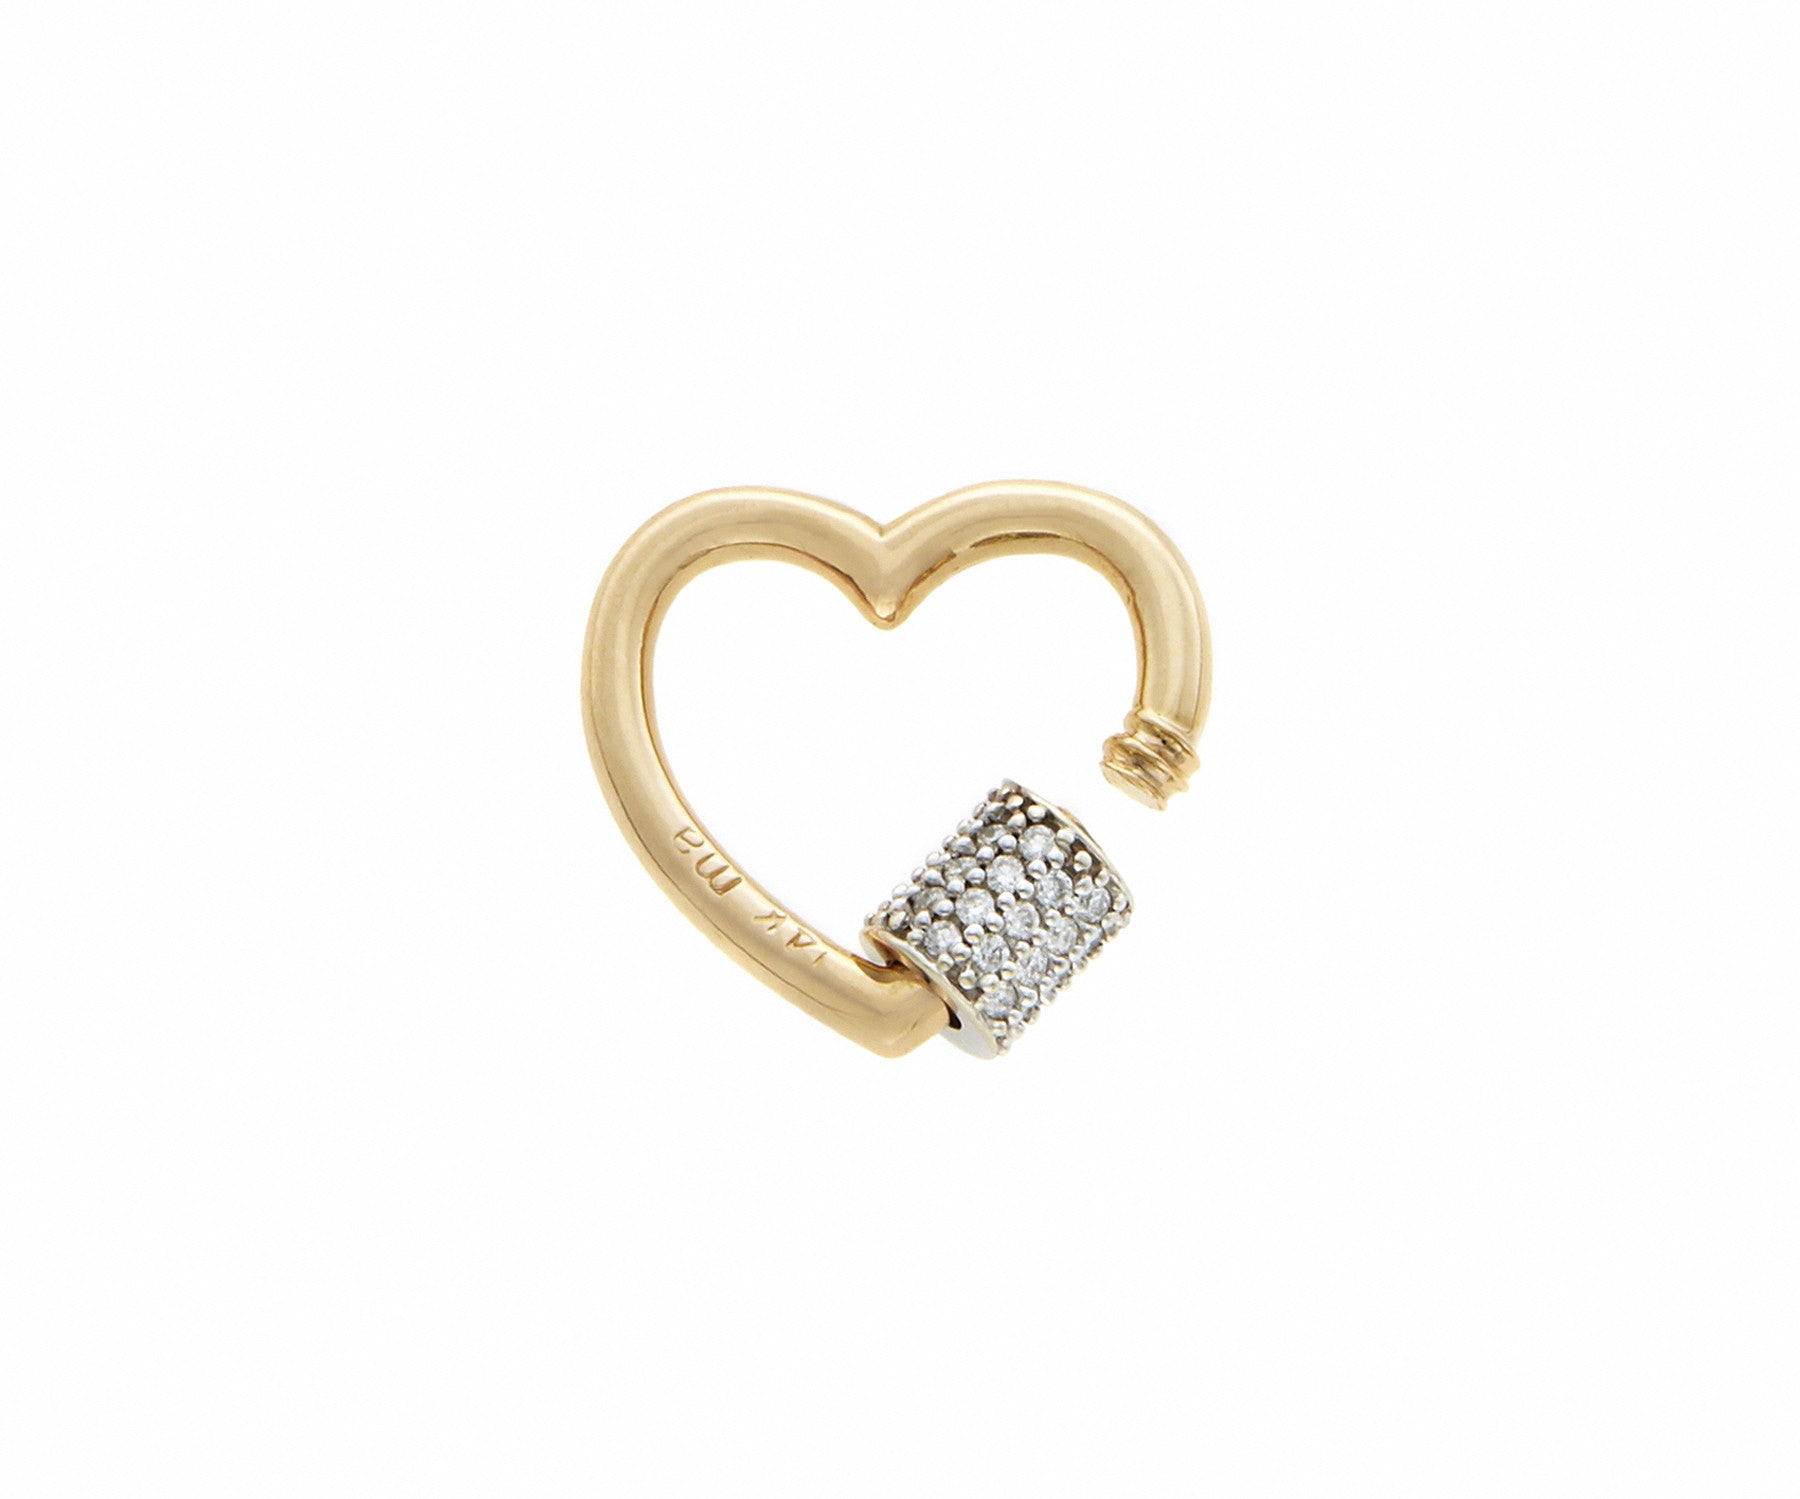 Gold diamond heart lock with open clasp